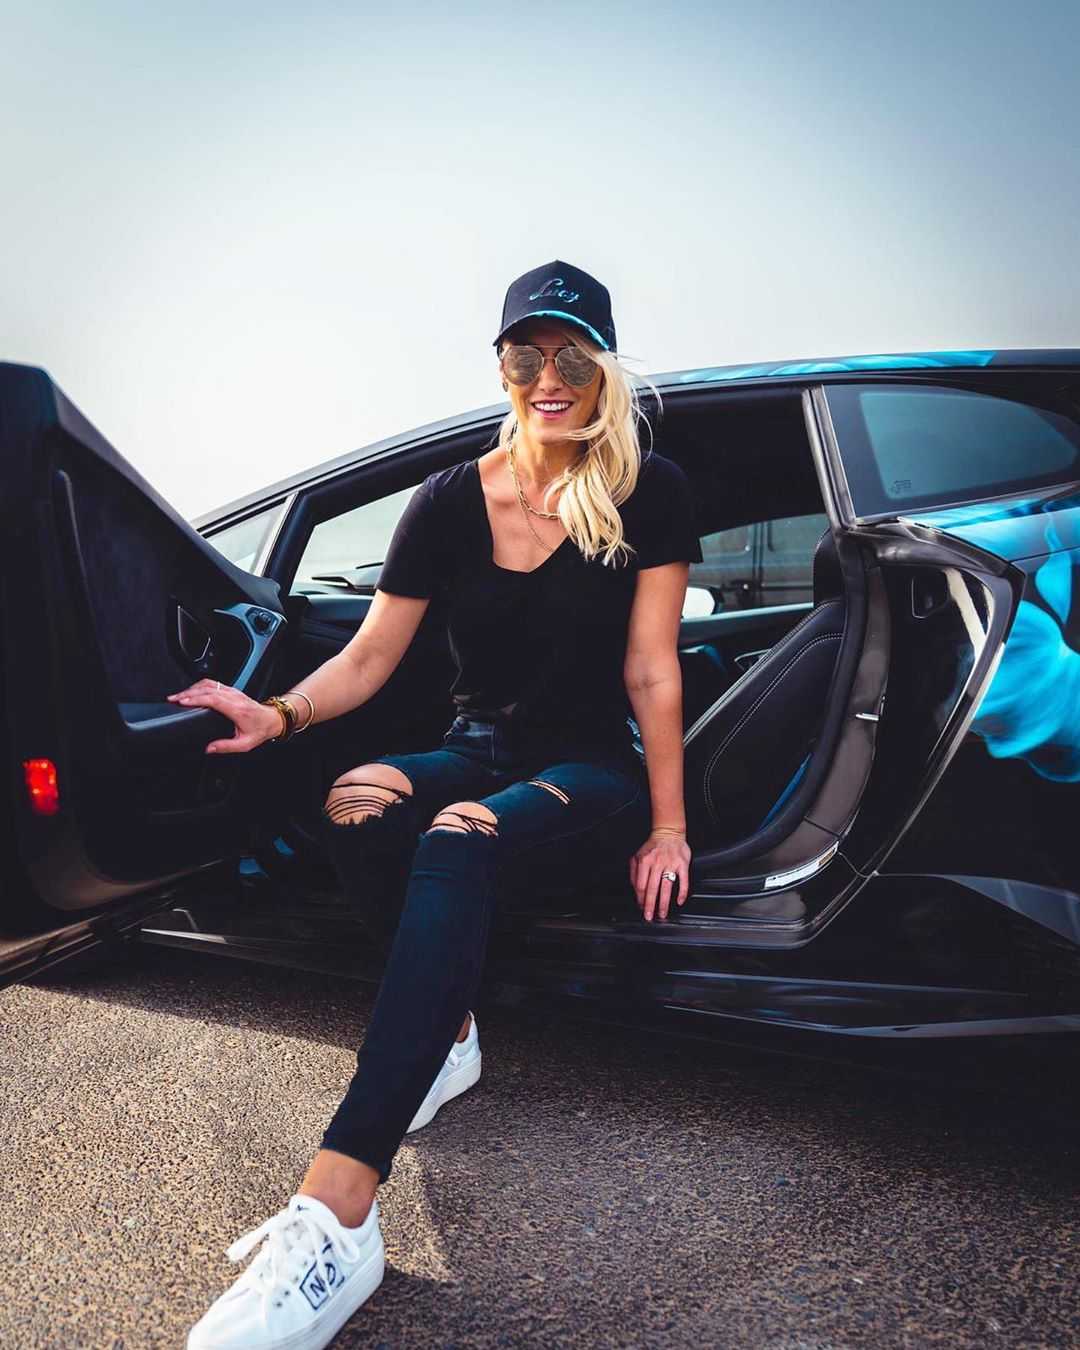 49 Hot Pictures Of Supercar Blondie Are Really Epic | Best Of Comic Books